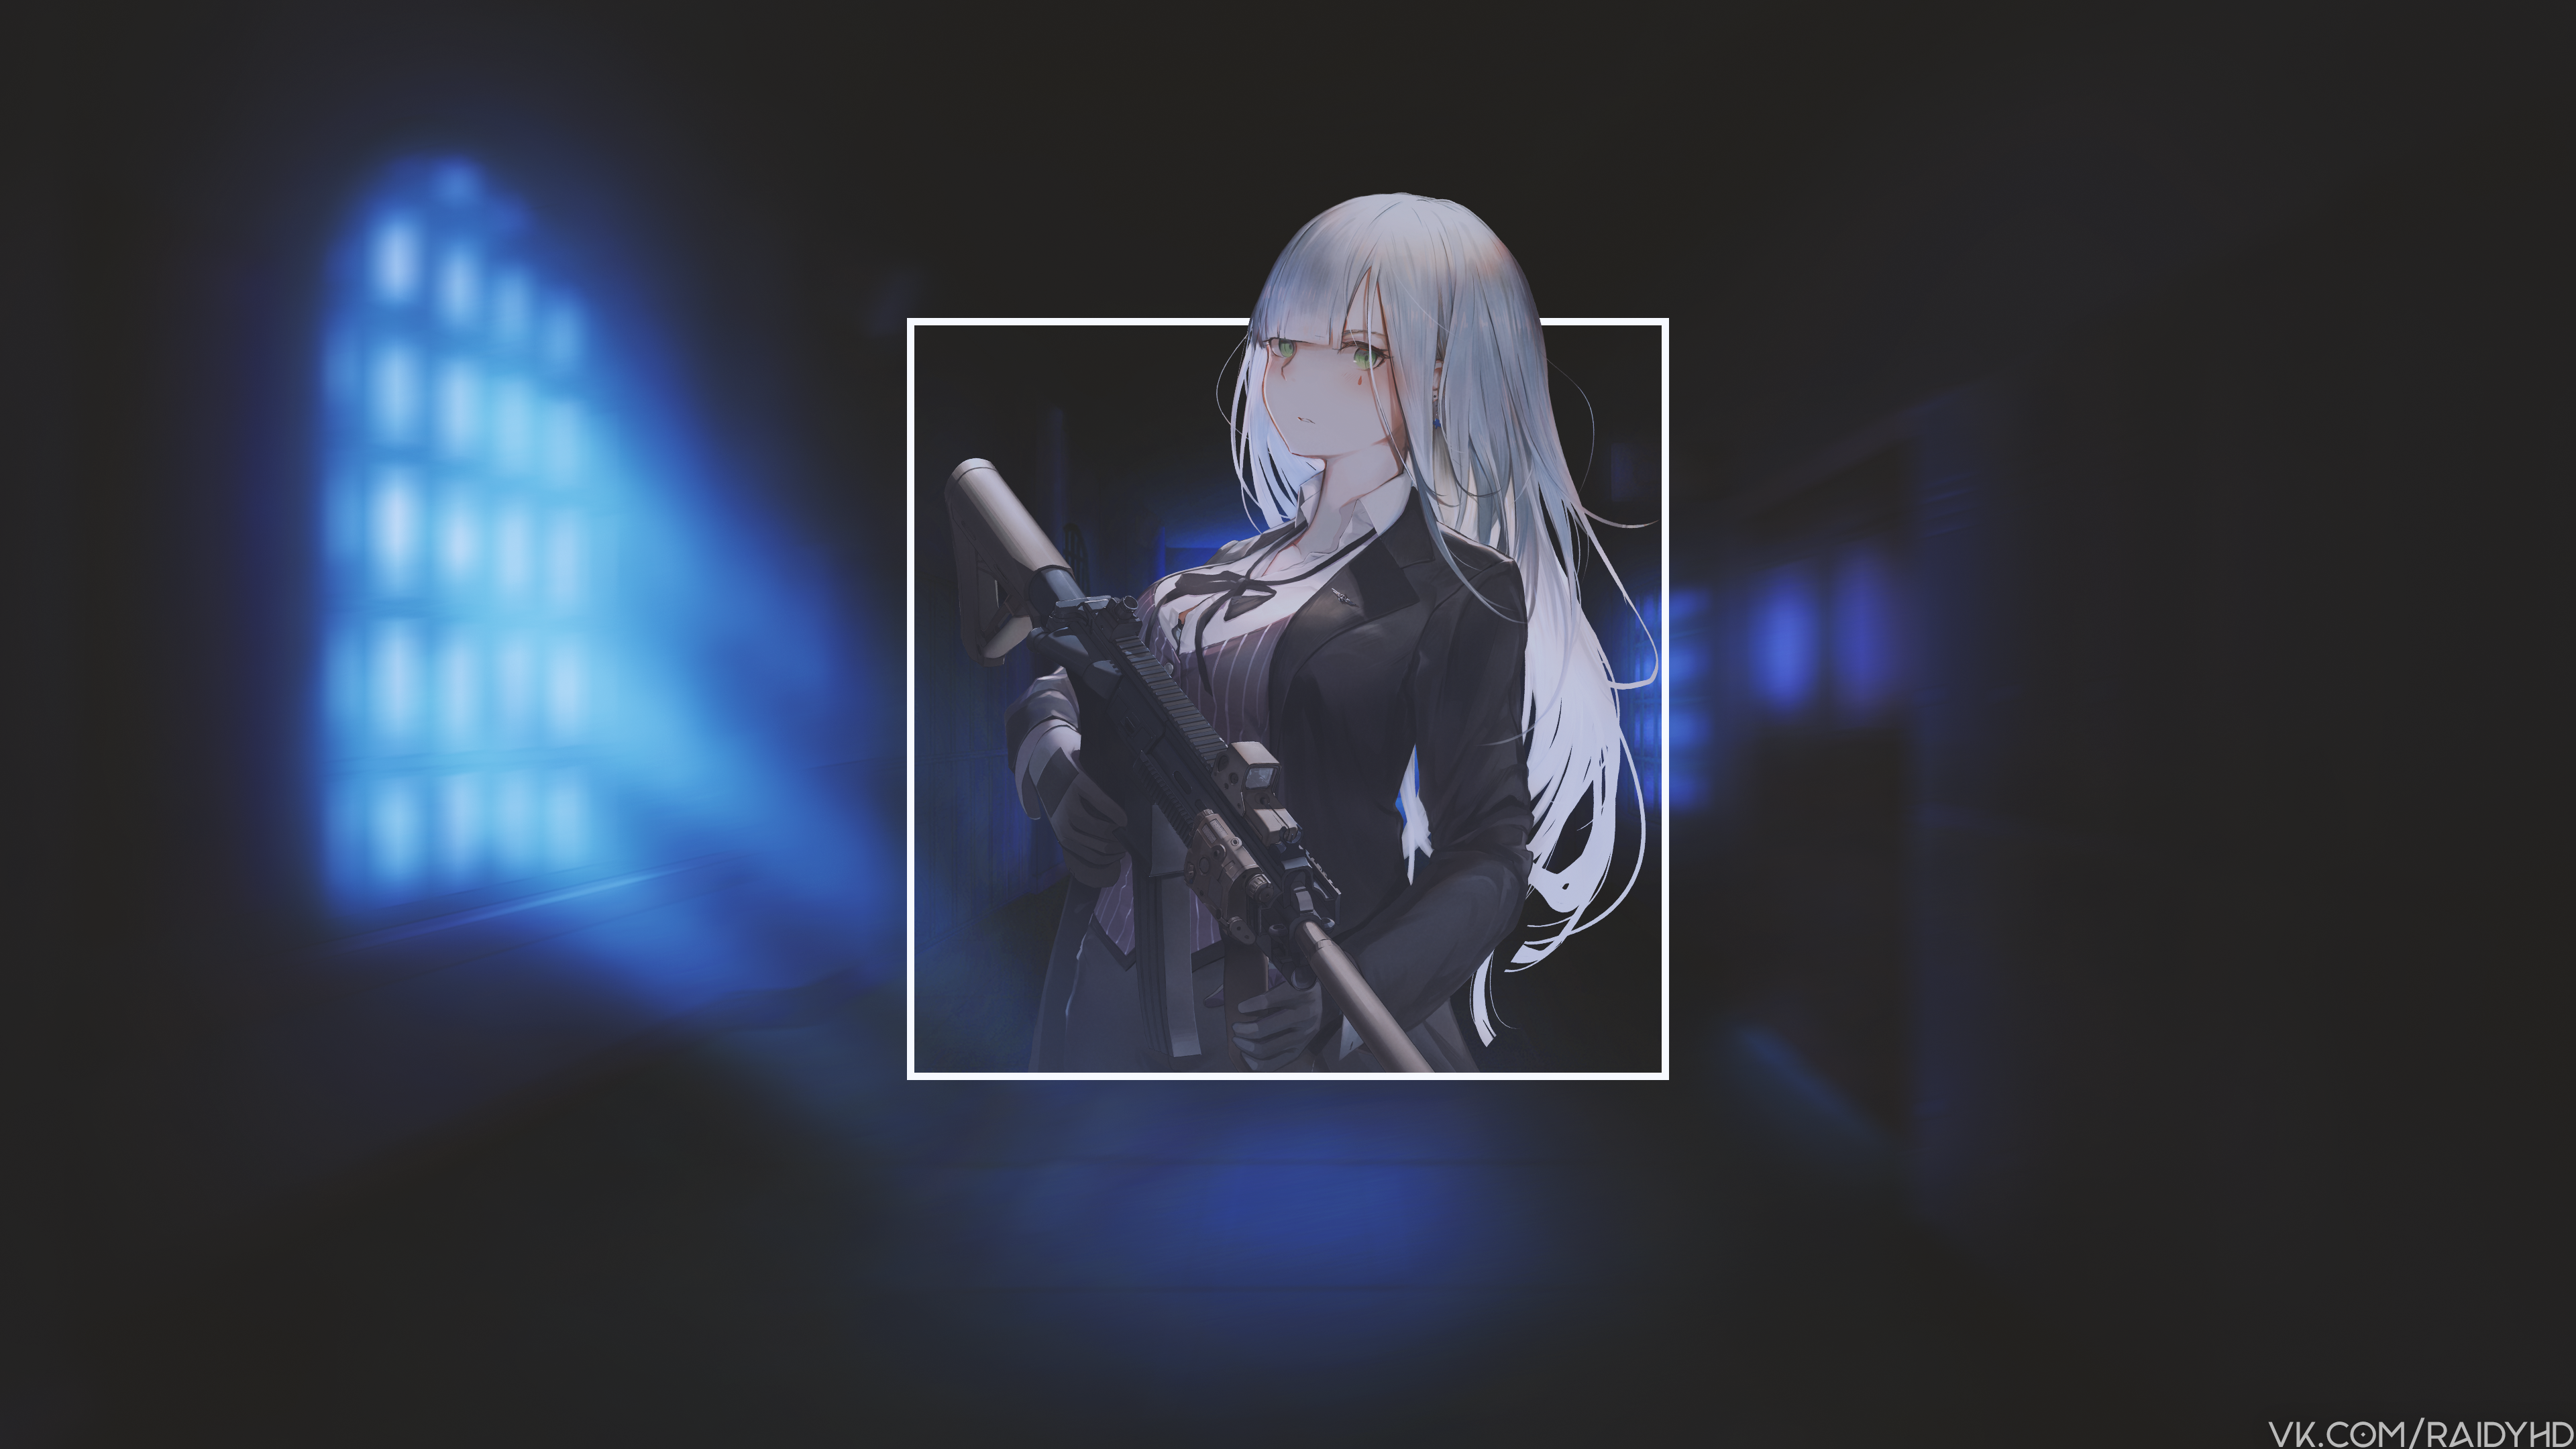 Anime 3840x2160 anime anime girls picture-in-picture Girls Frontline HK 416 (gun) HK416 (Girls Frontline)